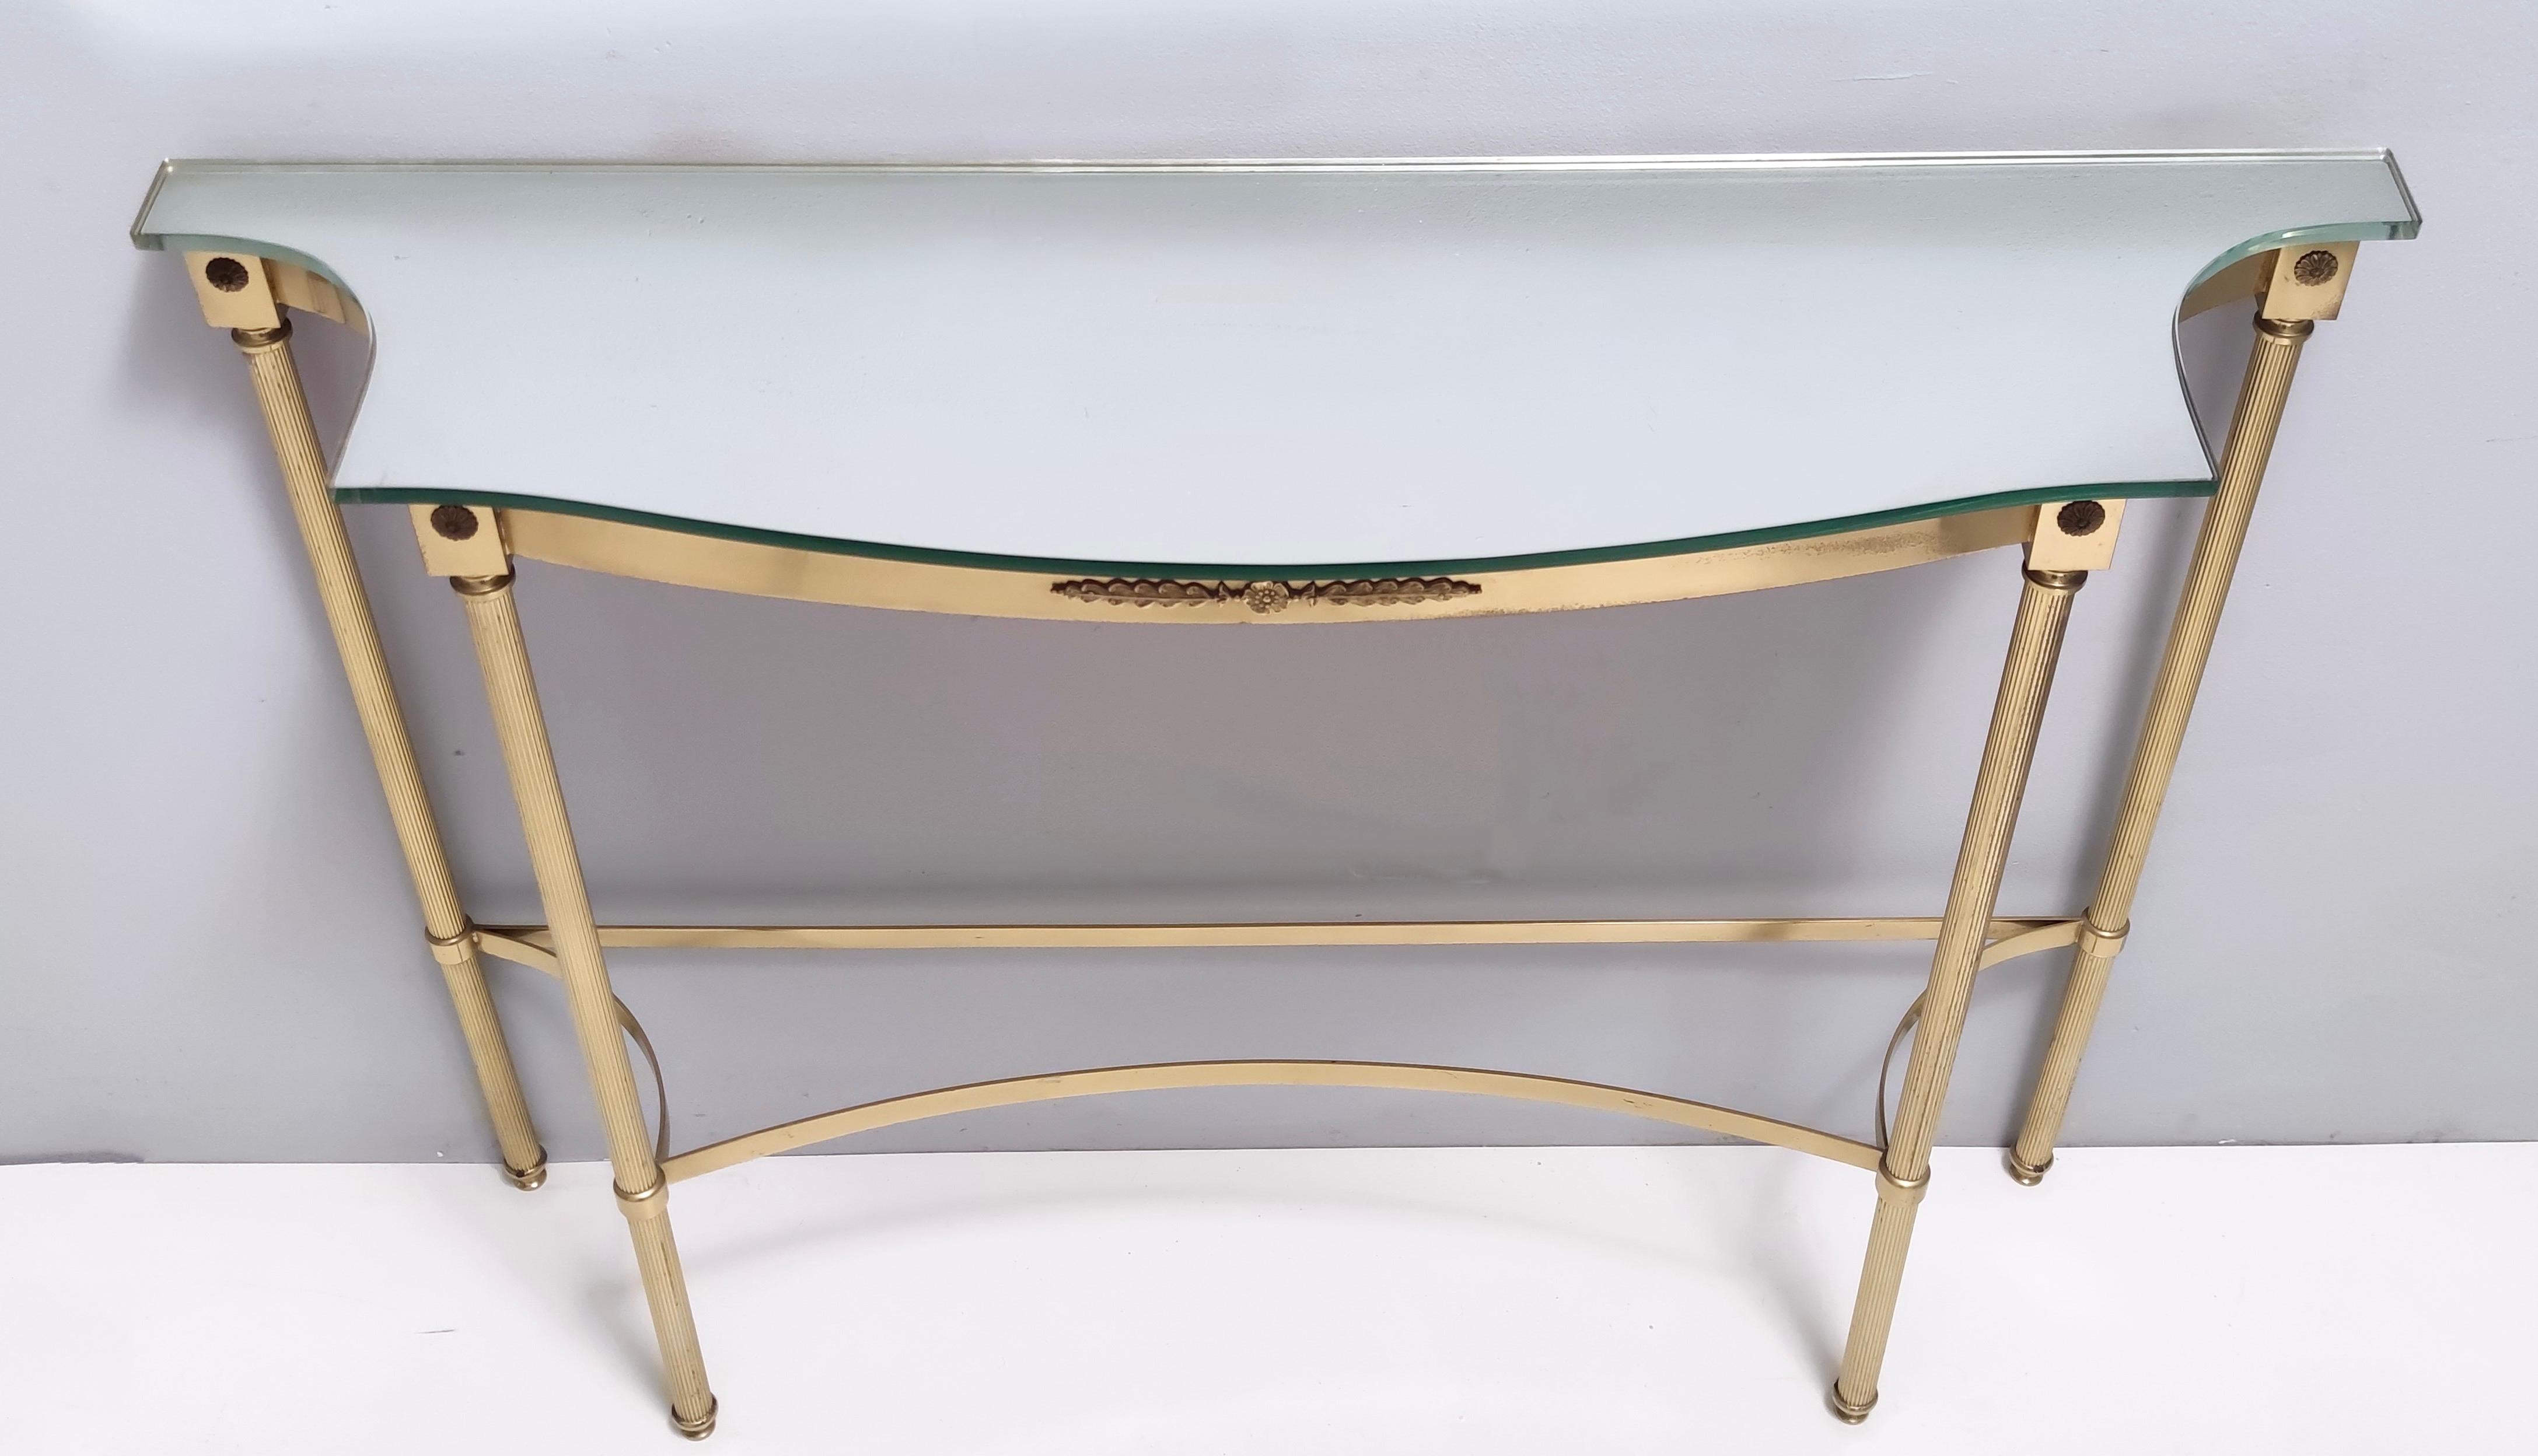 Vintage Brass Console Table with a Mirrored Top, Italy 1